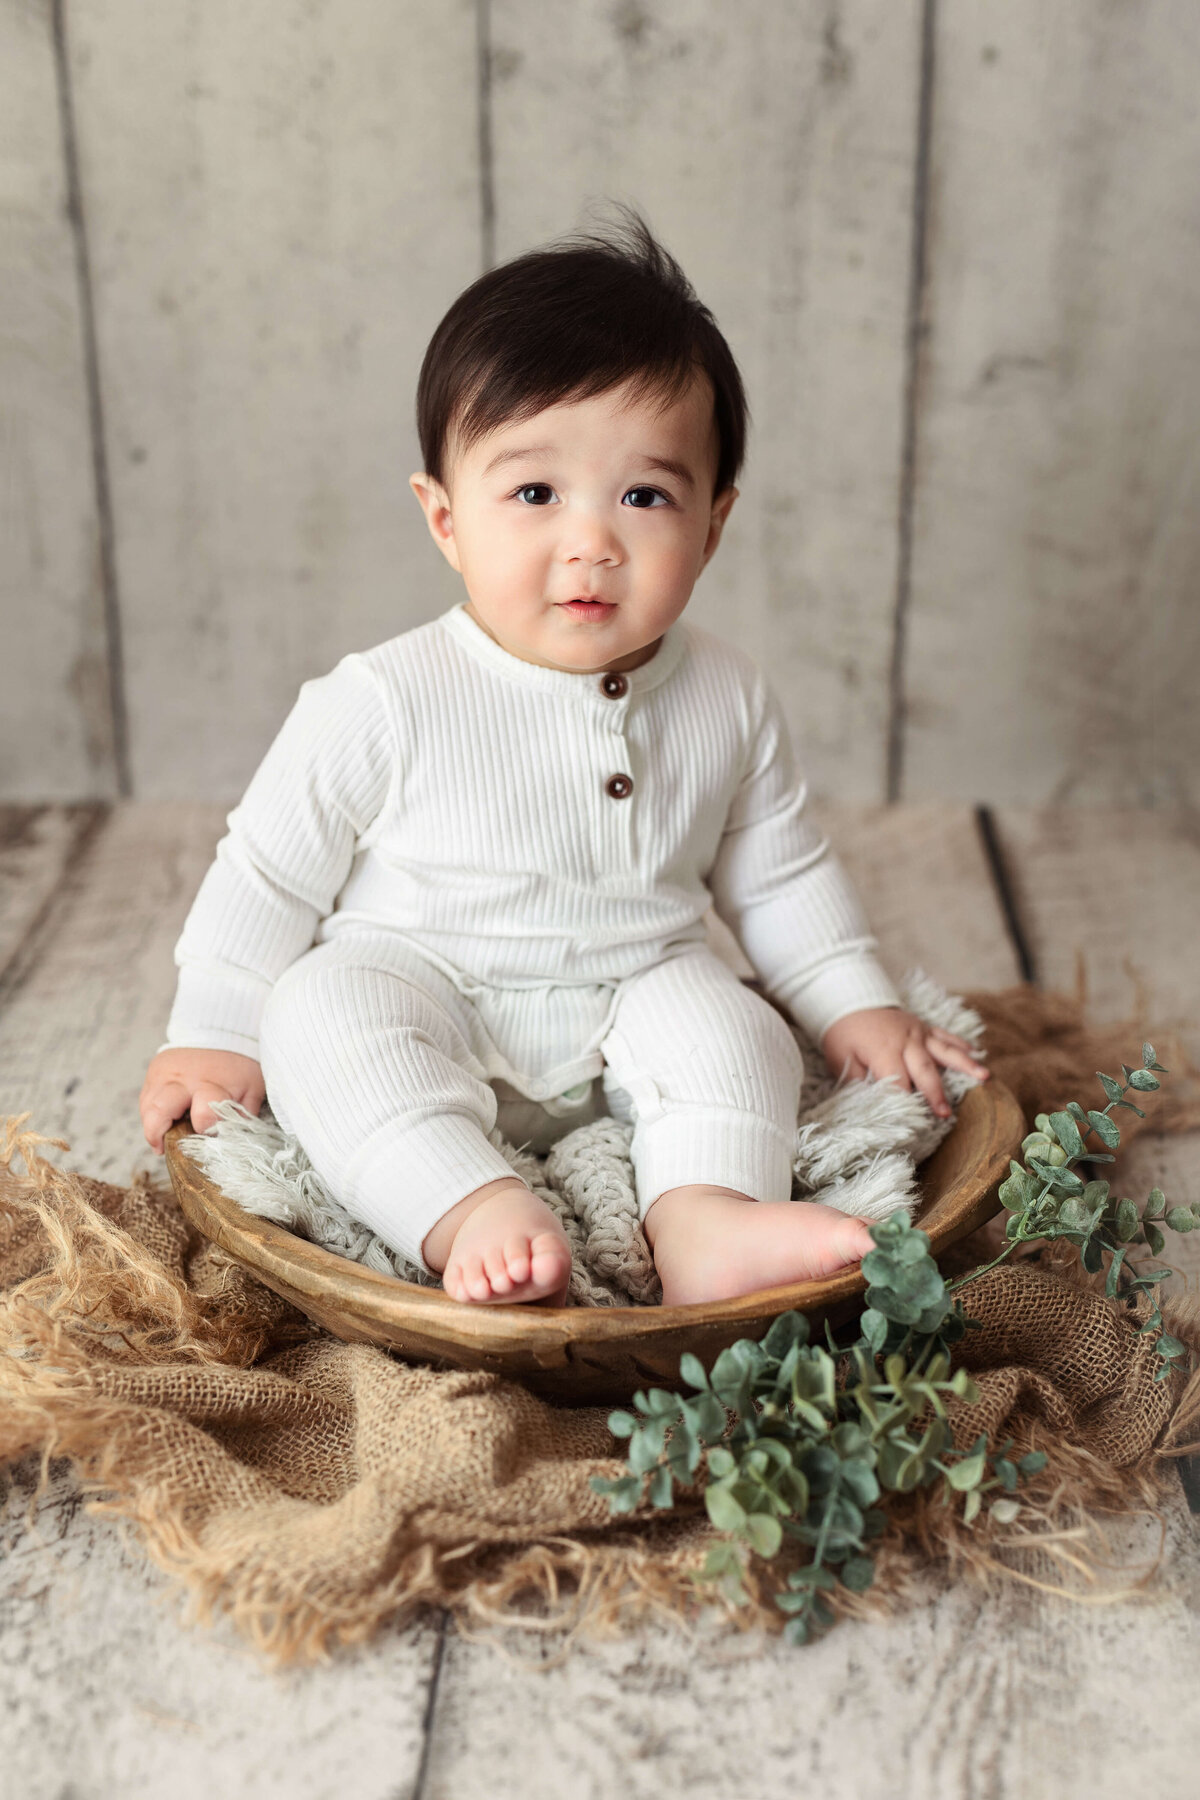 6 moth old boy in a white outfit sitting on a wooden bowl with greenery around it on a white wooden backdrop during a baby milestone session